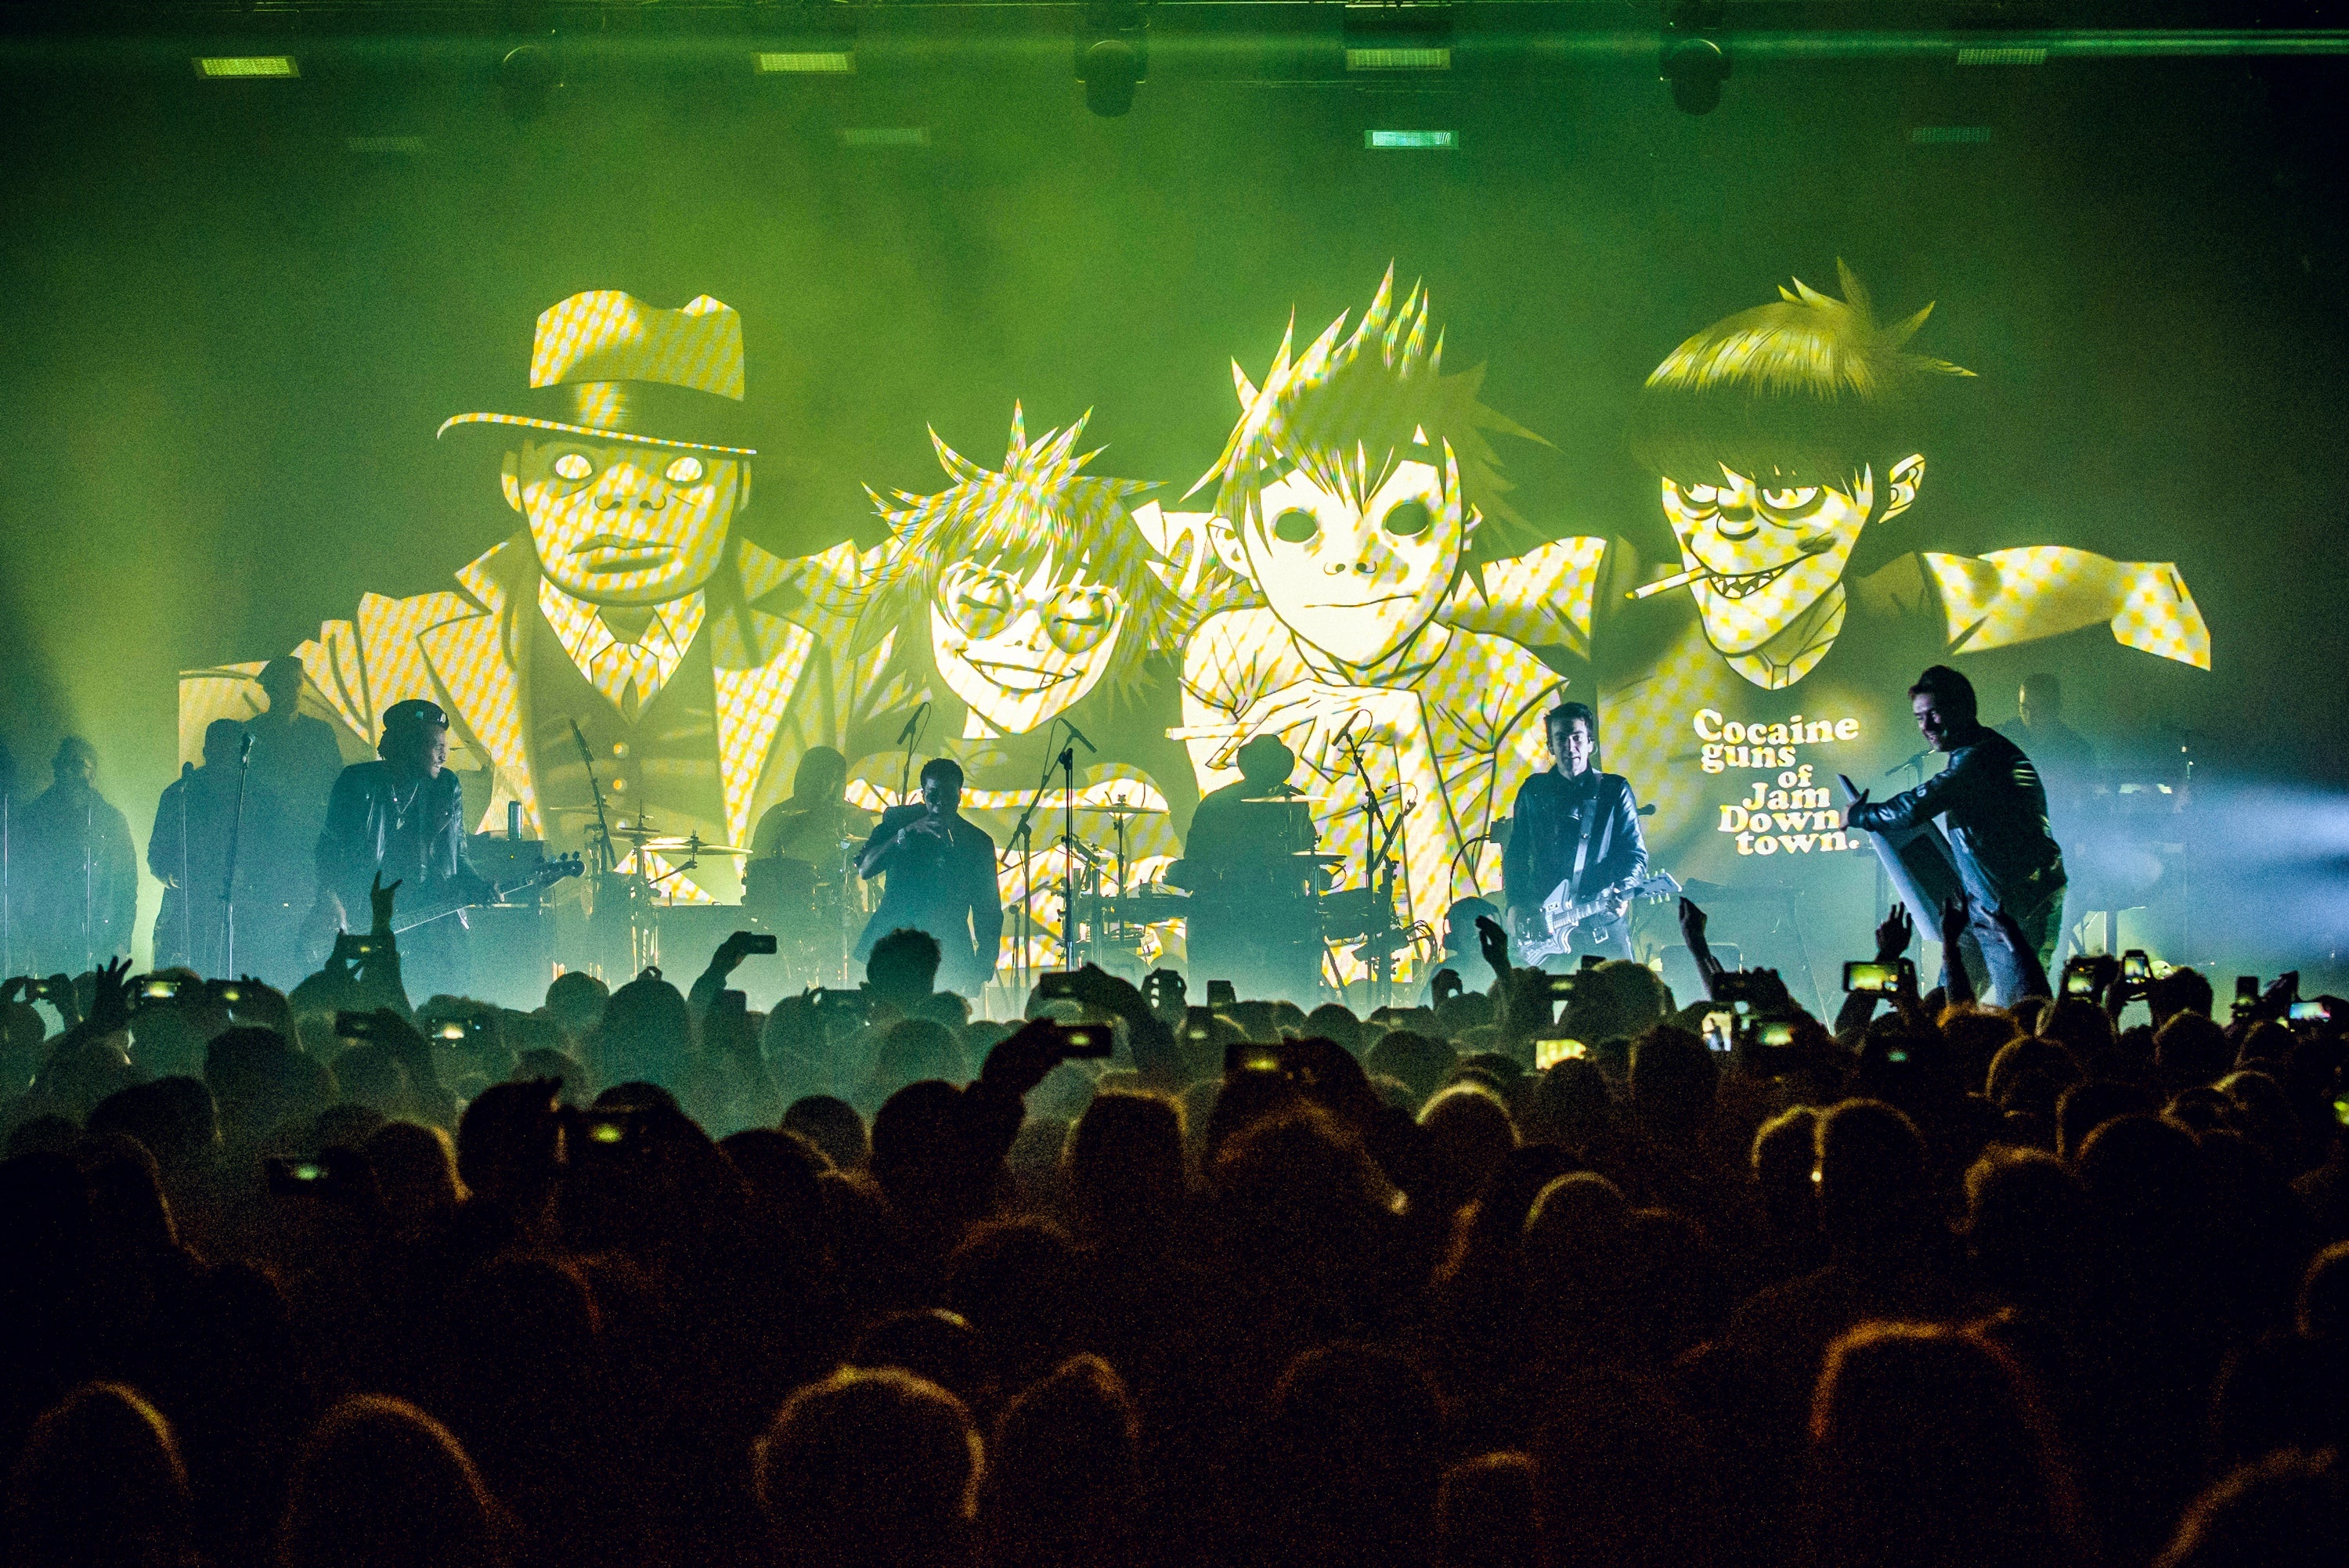 Gorillaz: World Tour 2022, Twenty years of addictive dance music, Live touring featuring a fully visible band. 3000x2010 HD Wallpaper.